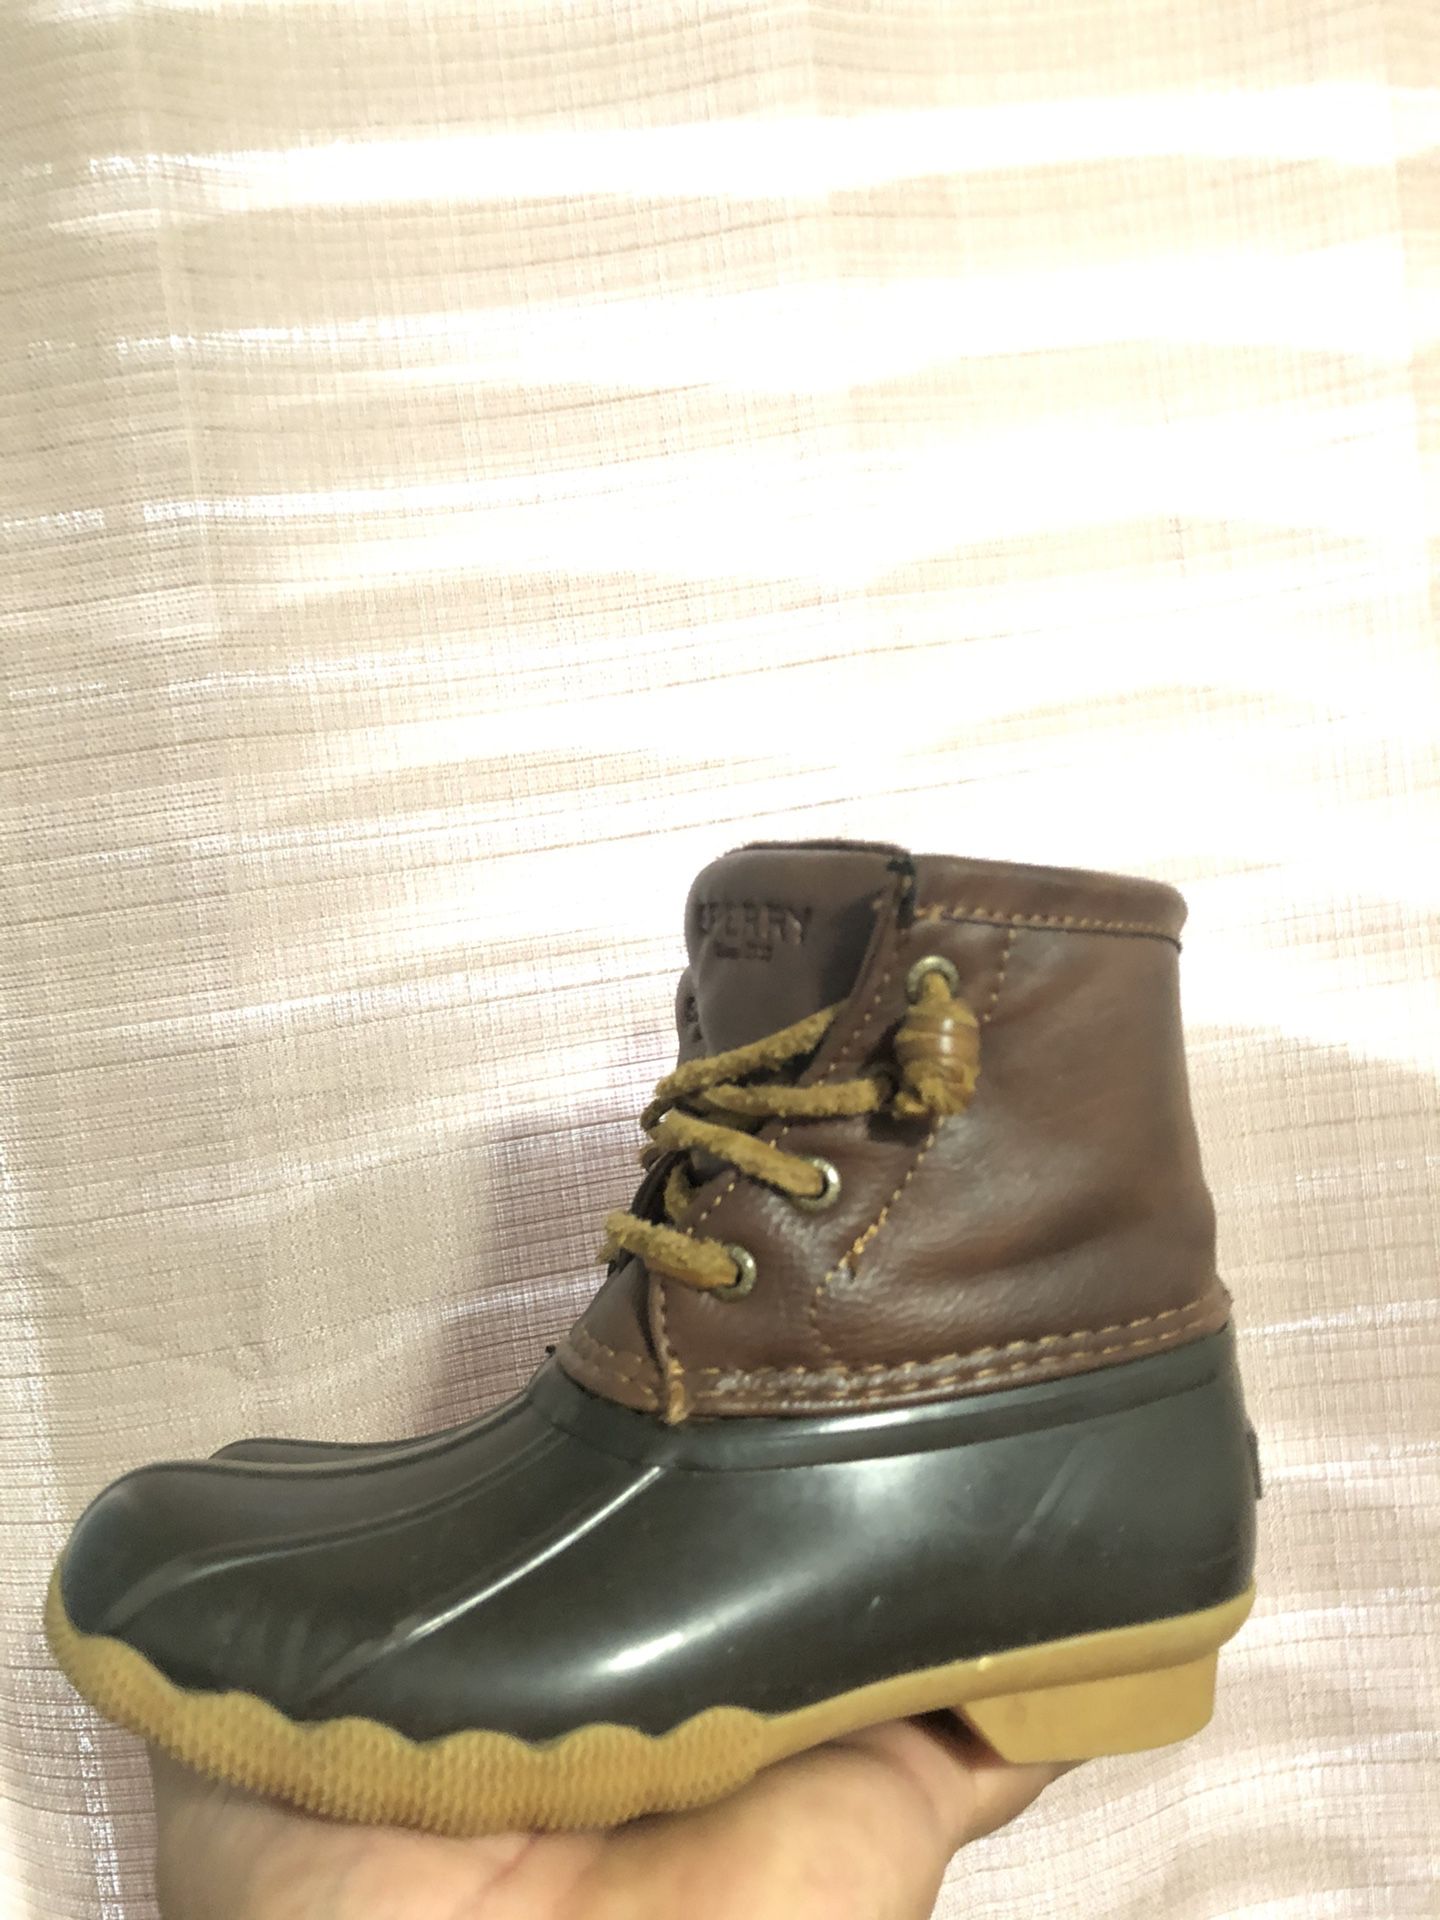 Girls Size 12 Sperry Duck Boots